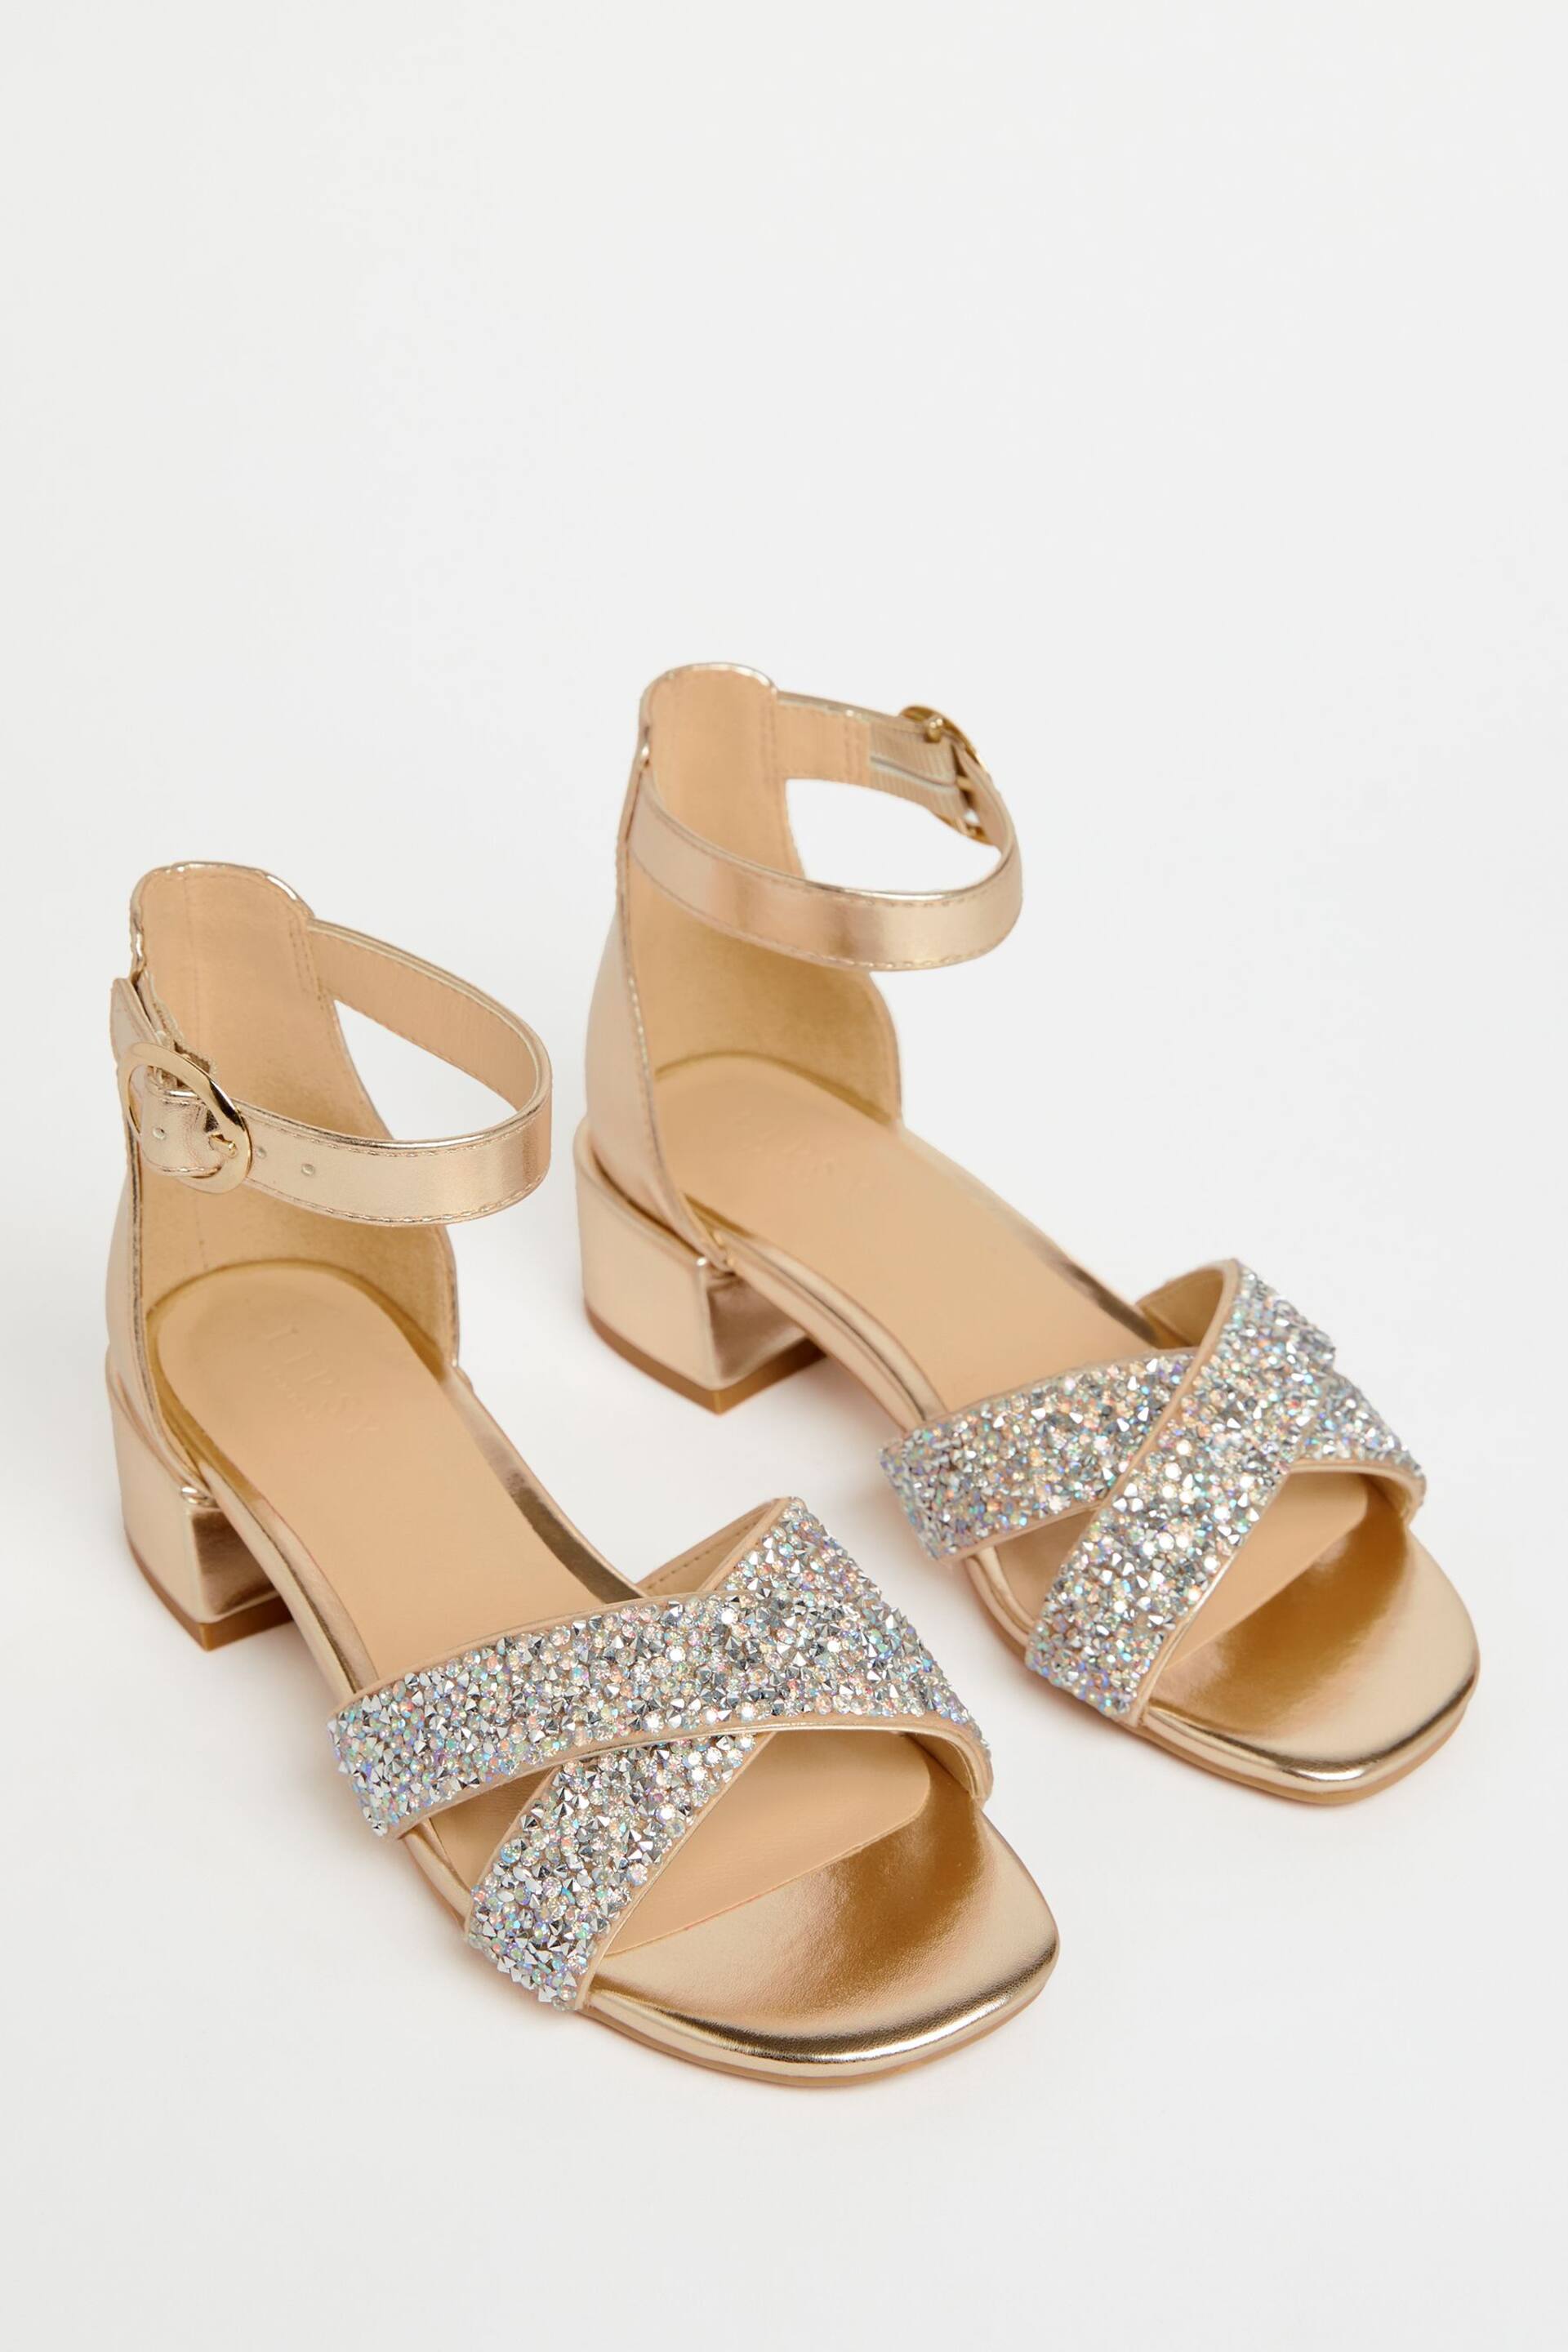 Lipsy Gold Low Block Heel Occasion Sandal - Image 1 of 4